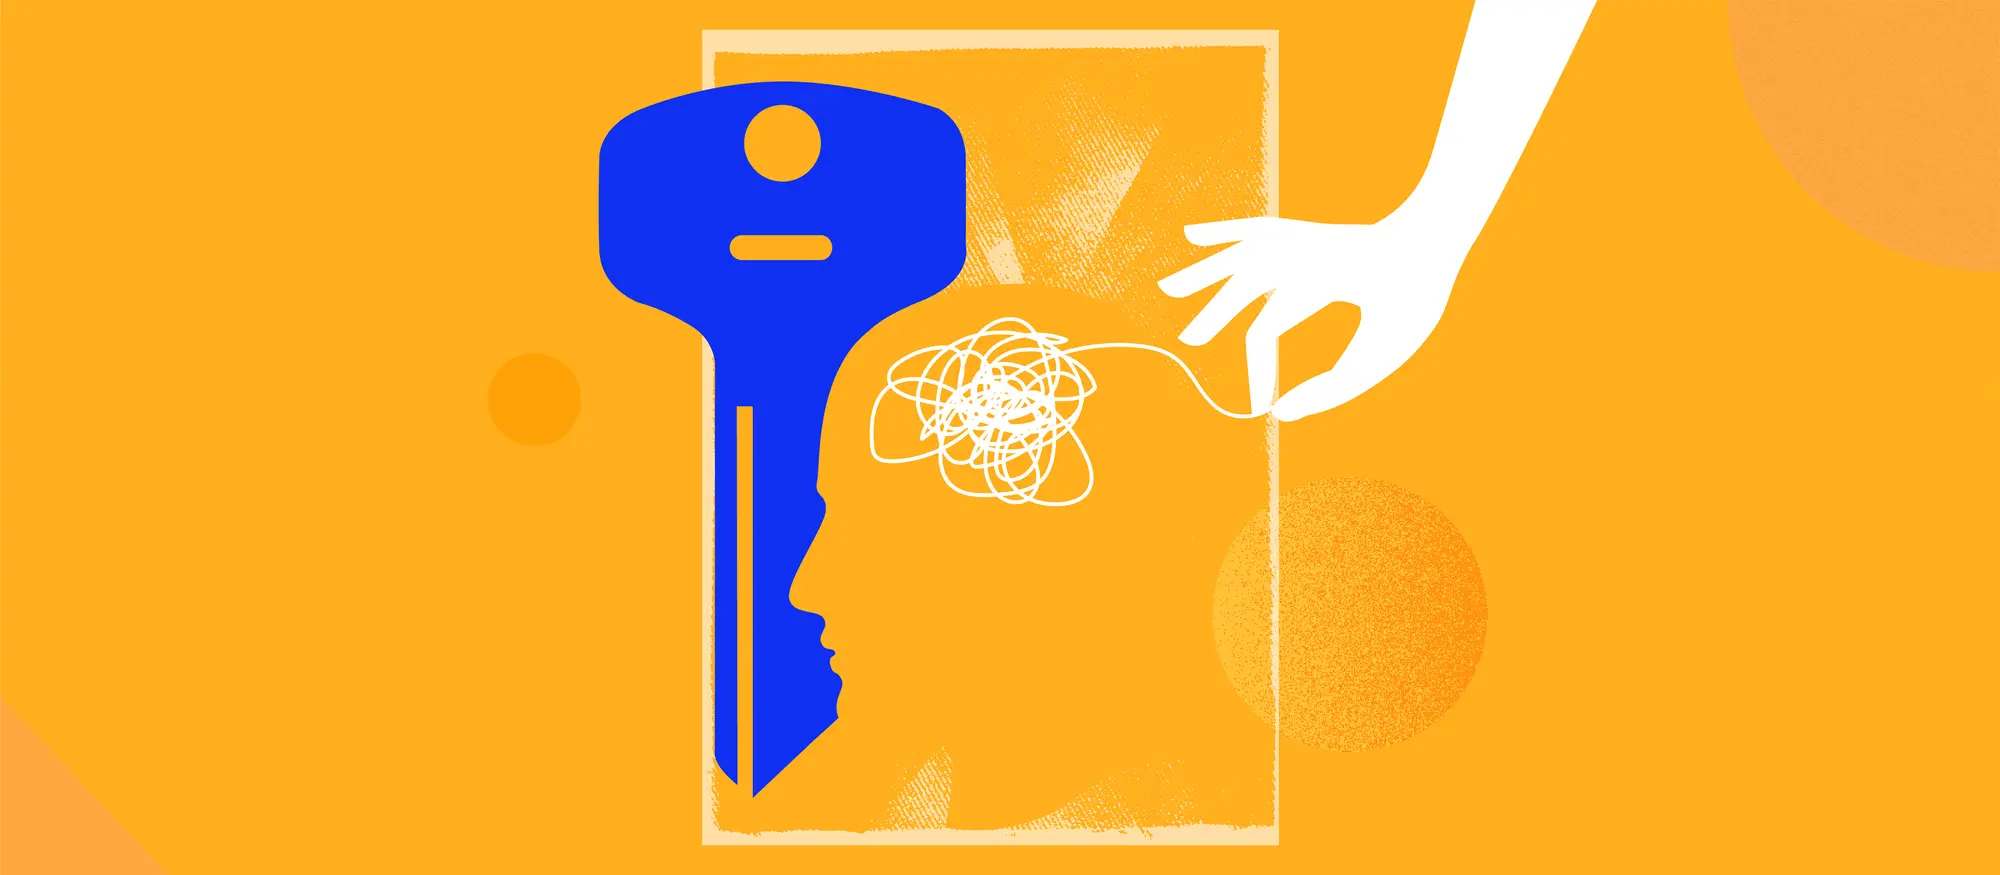 Illustration of a blue key on a yellow background. 